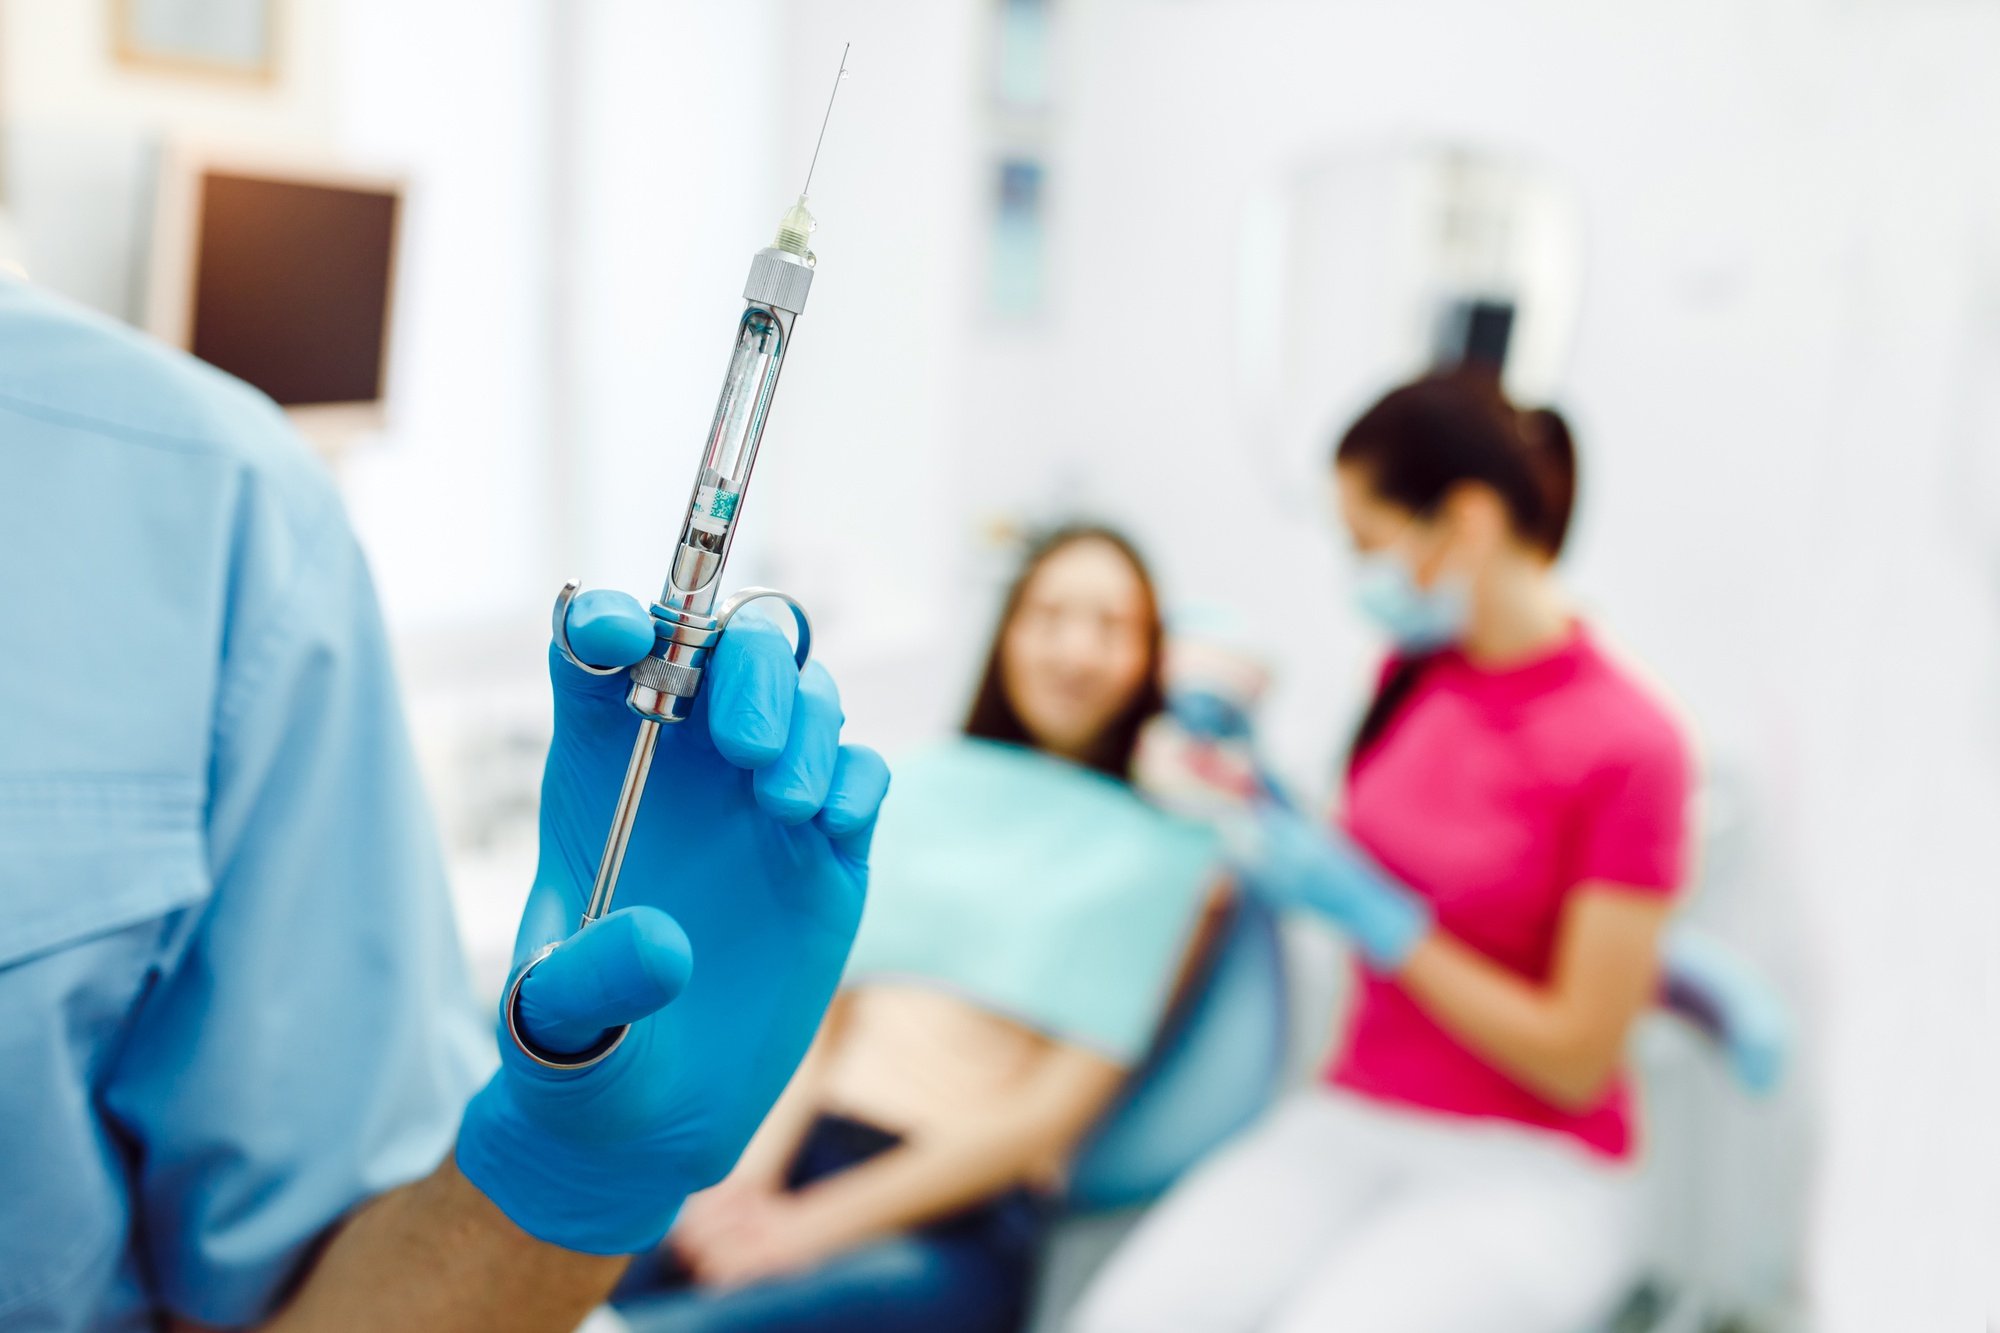 General Anesthesia Types Risks Drugs Side Effects How It Works - Reverasite